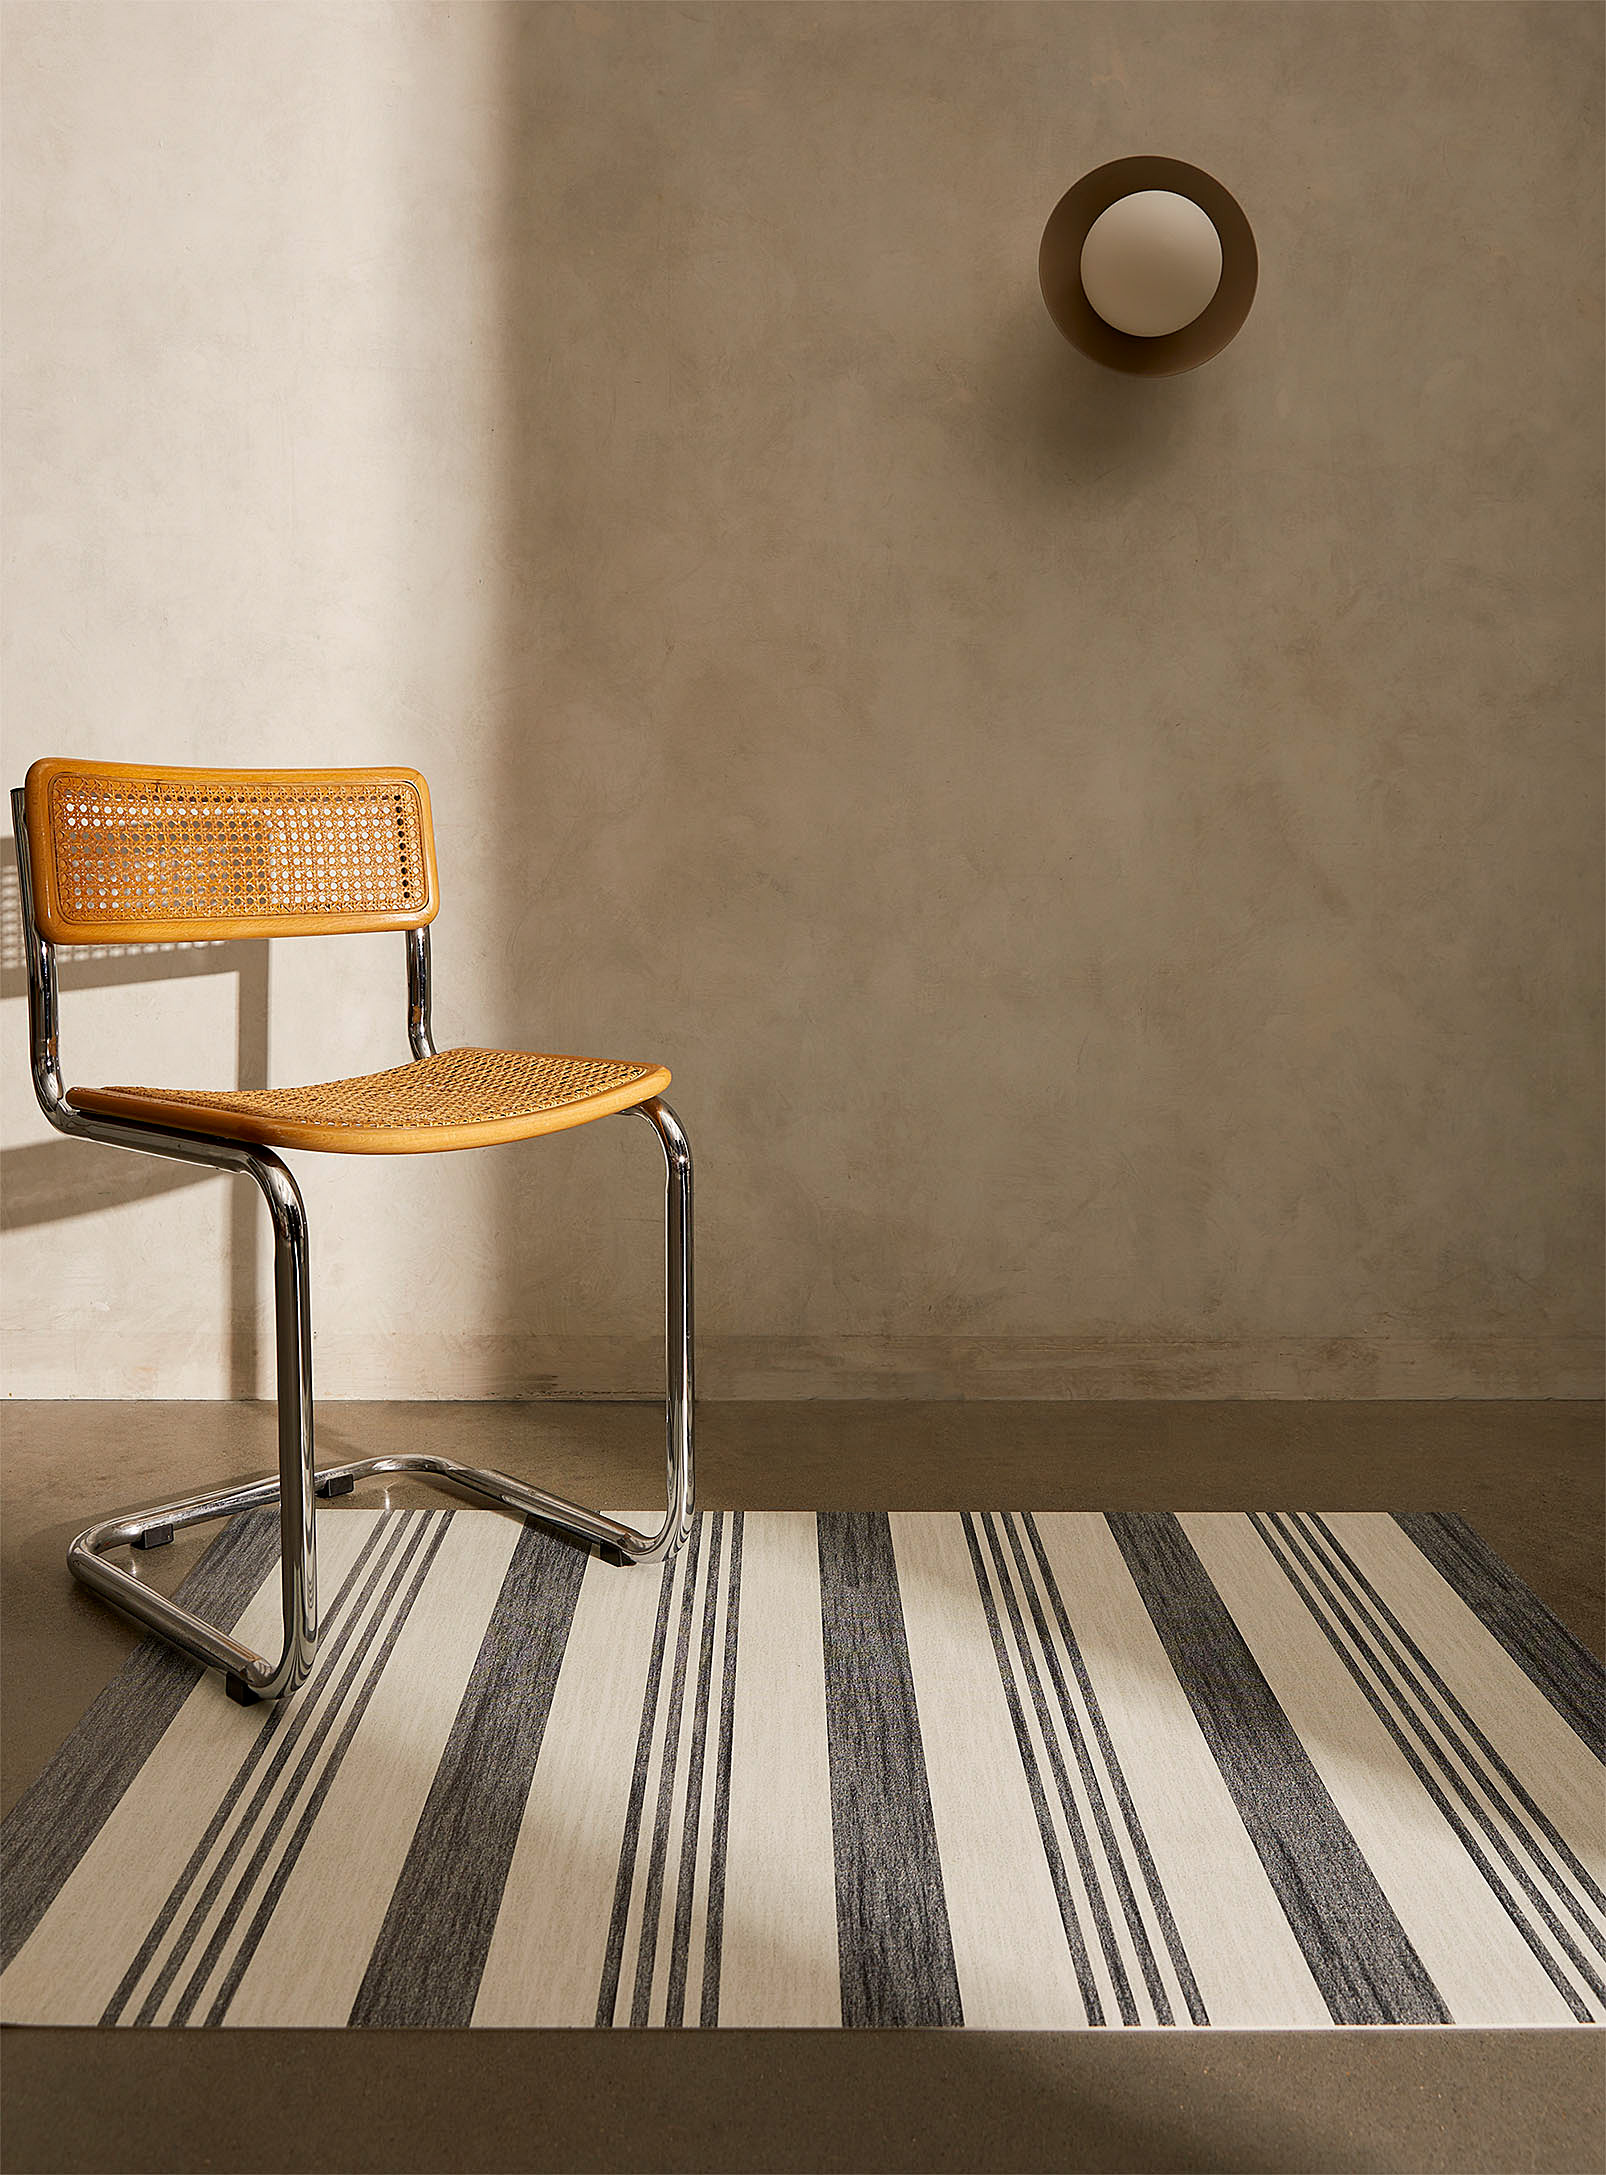 Adama Heathered Stripes Vinyl Mat See Available Sizes In Charcoal